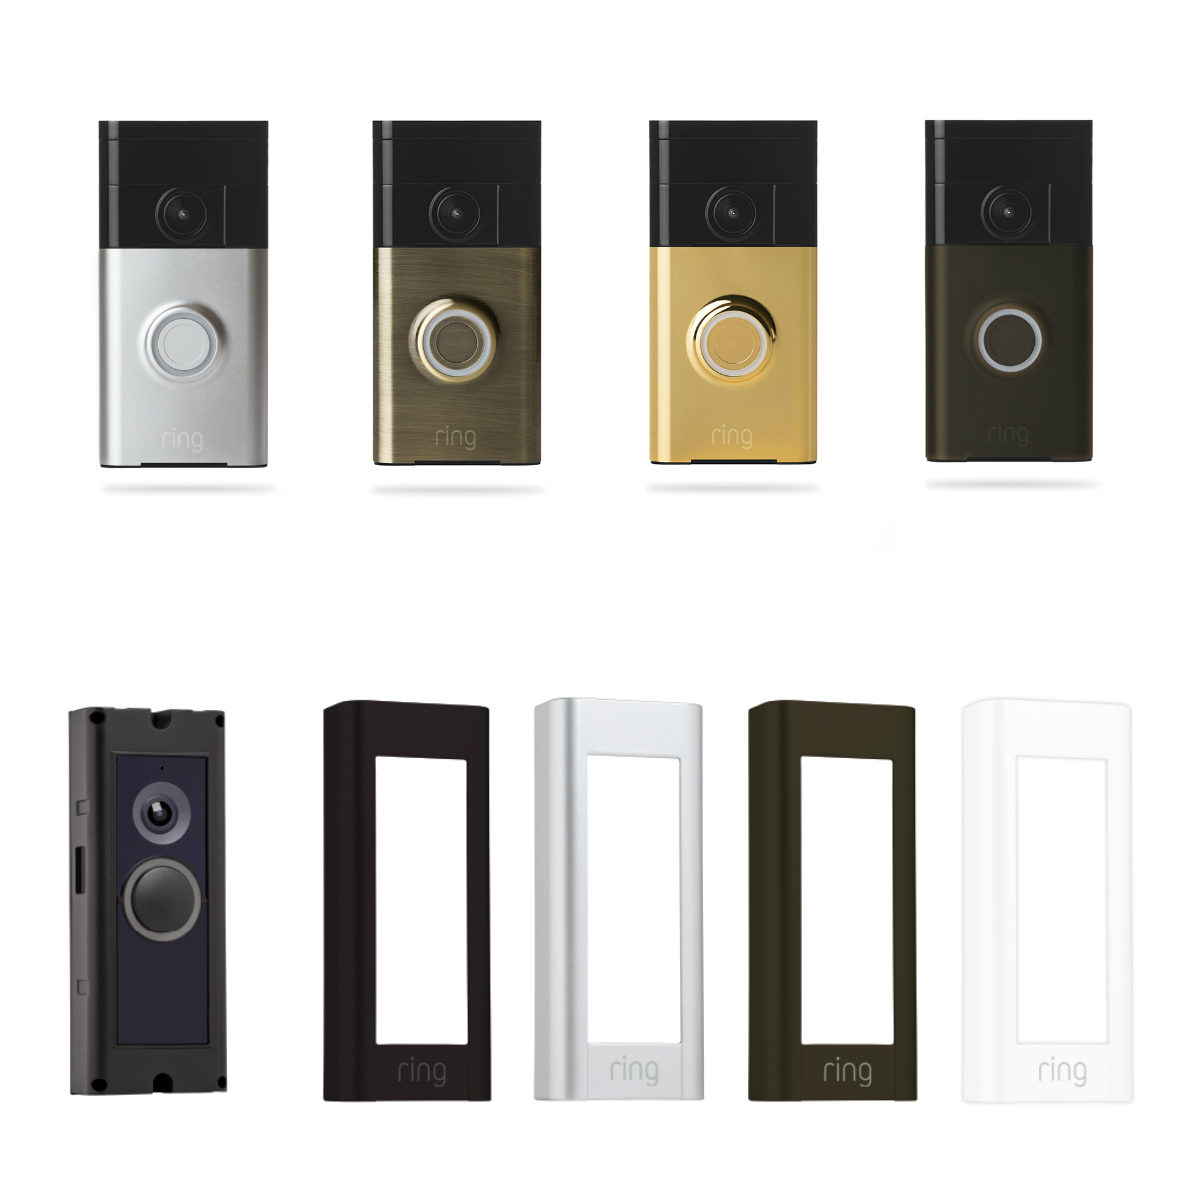 Ring Doorbell All Colors And Pro.jpg